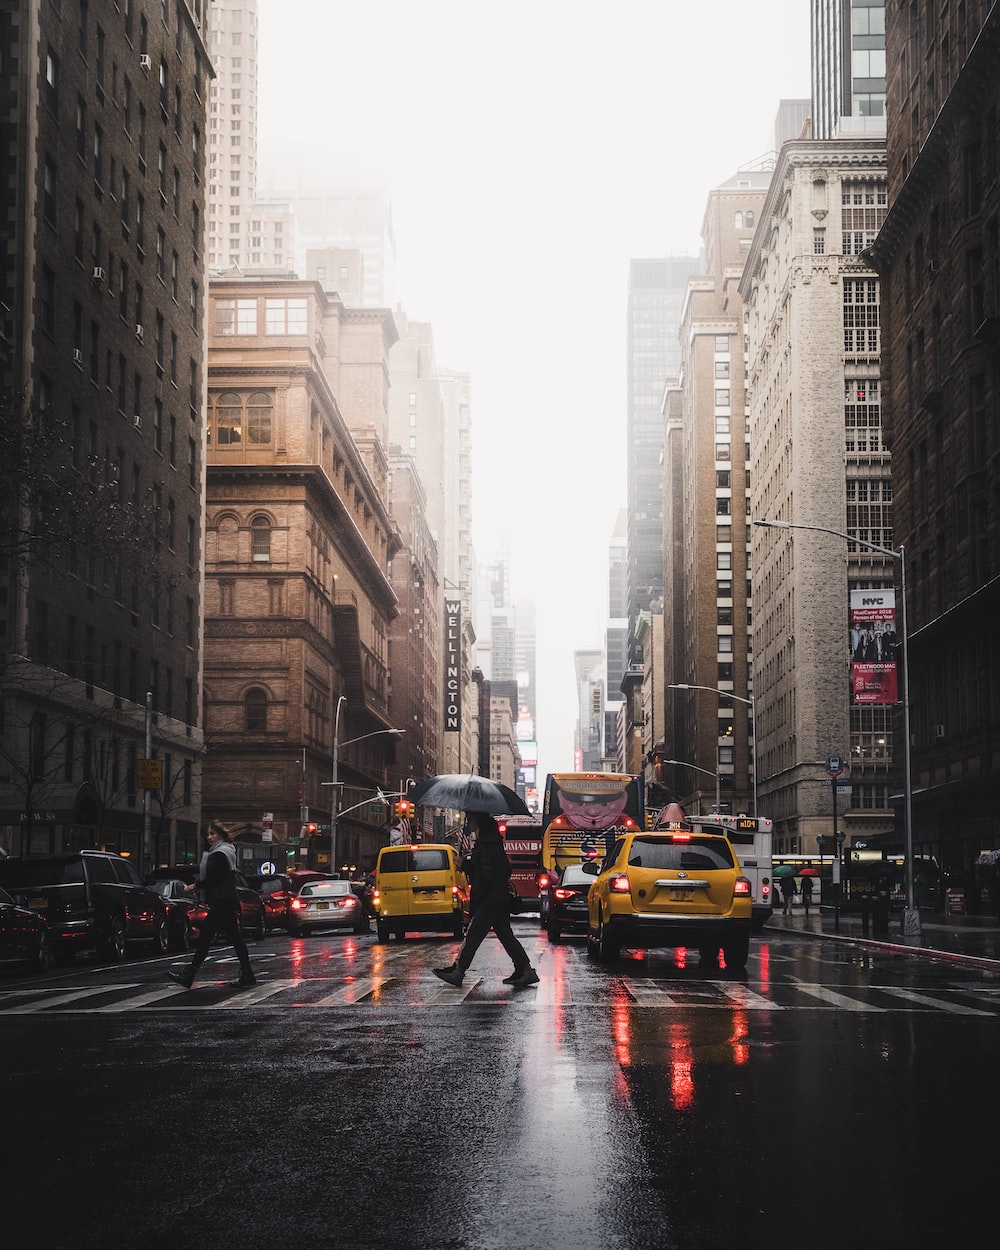 New York Rain Picture. Download Free Image